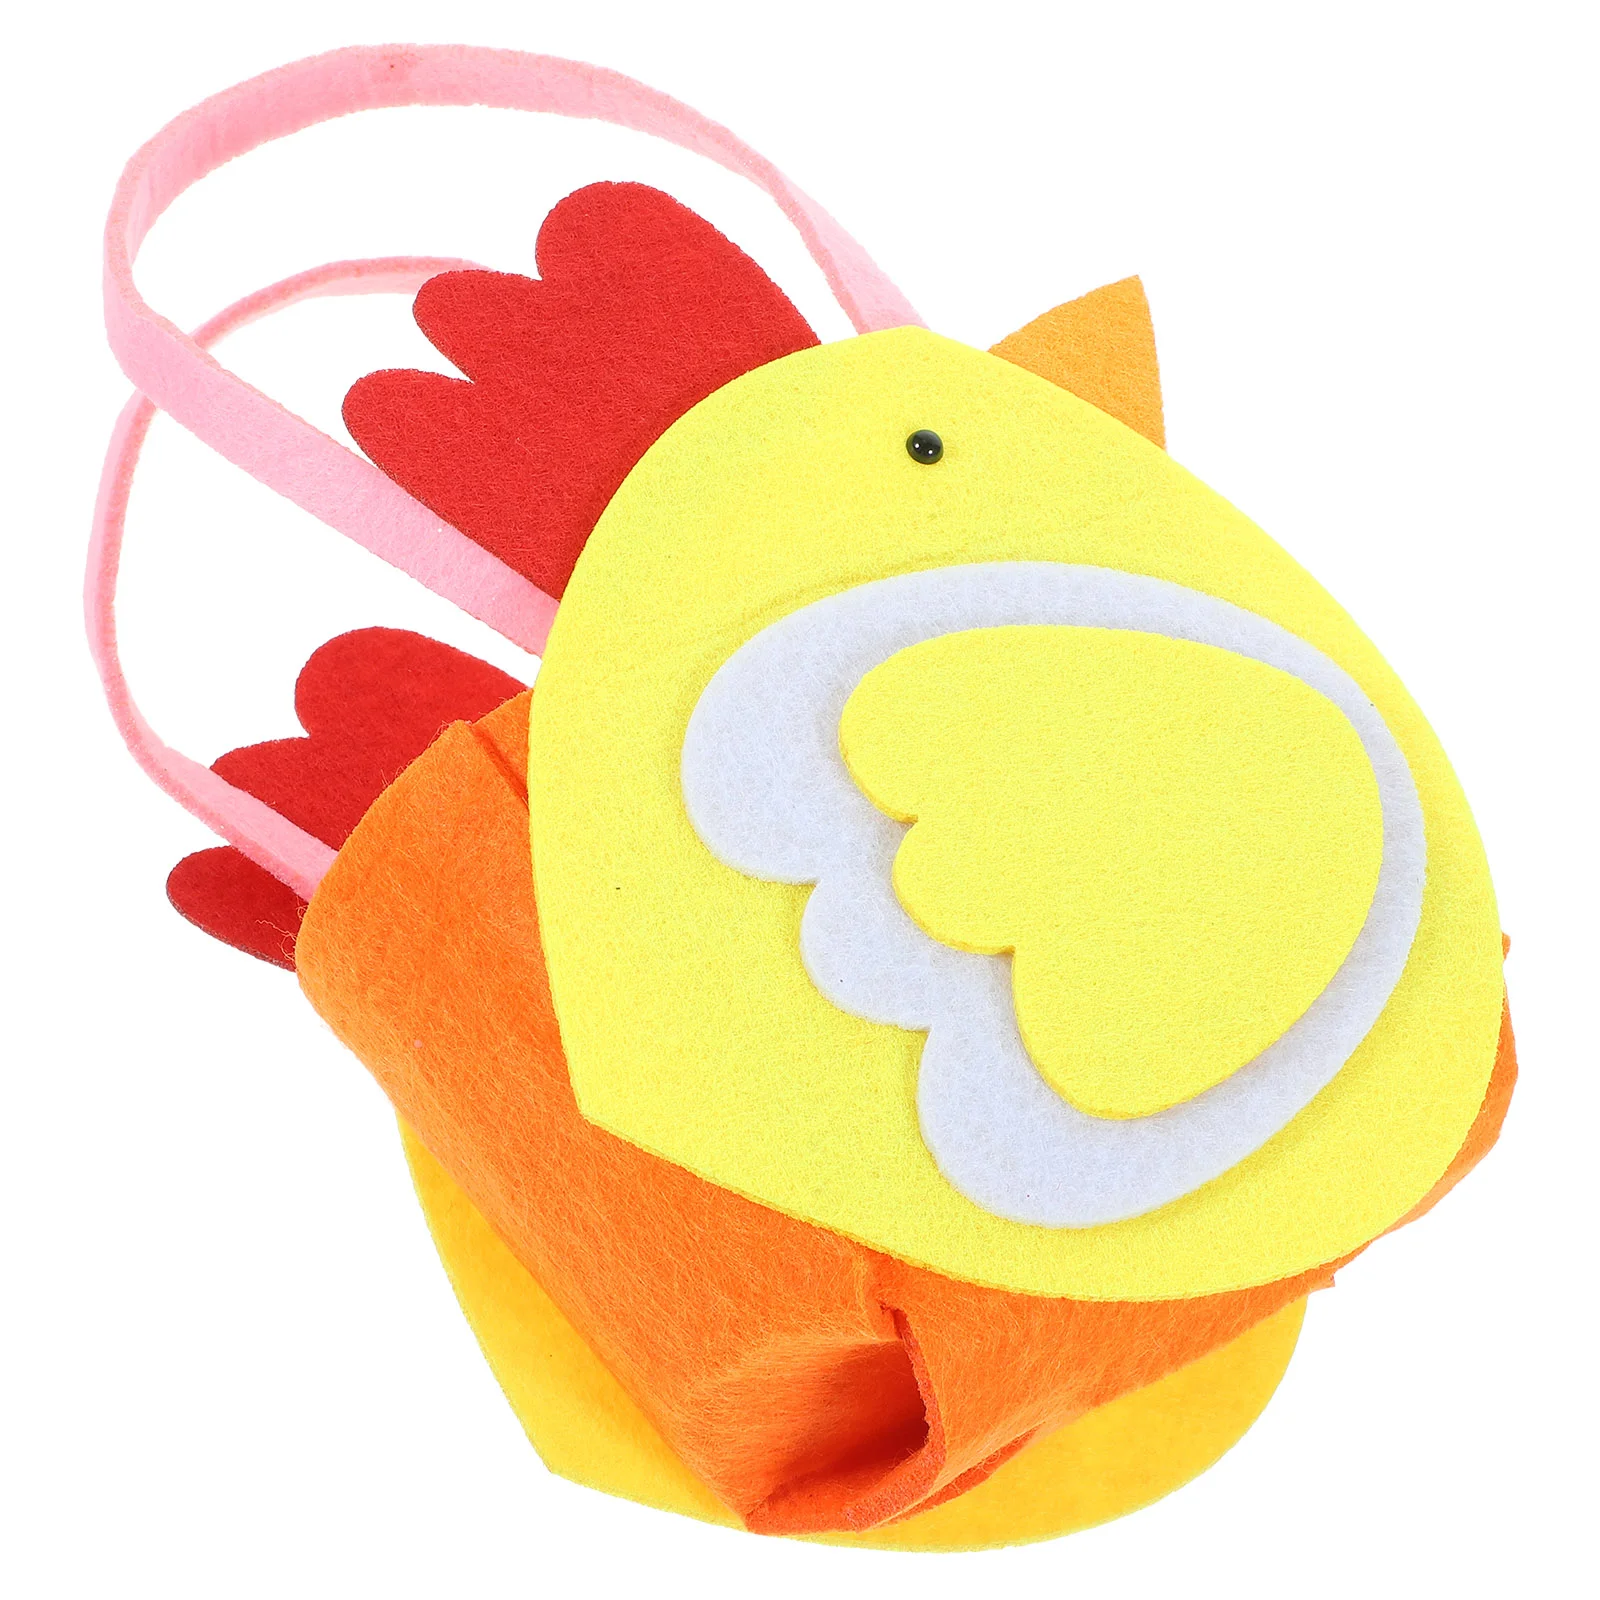 

Party Chicken Treat Bag Large Gift Container Snack Storage Holder Party Favors Candy Bag for Banquet